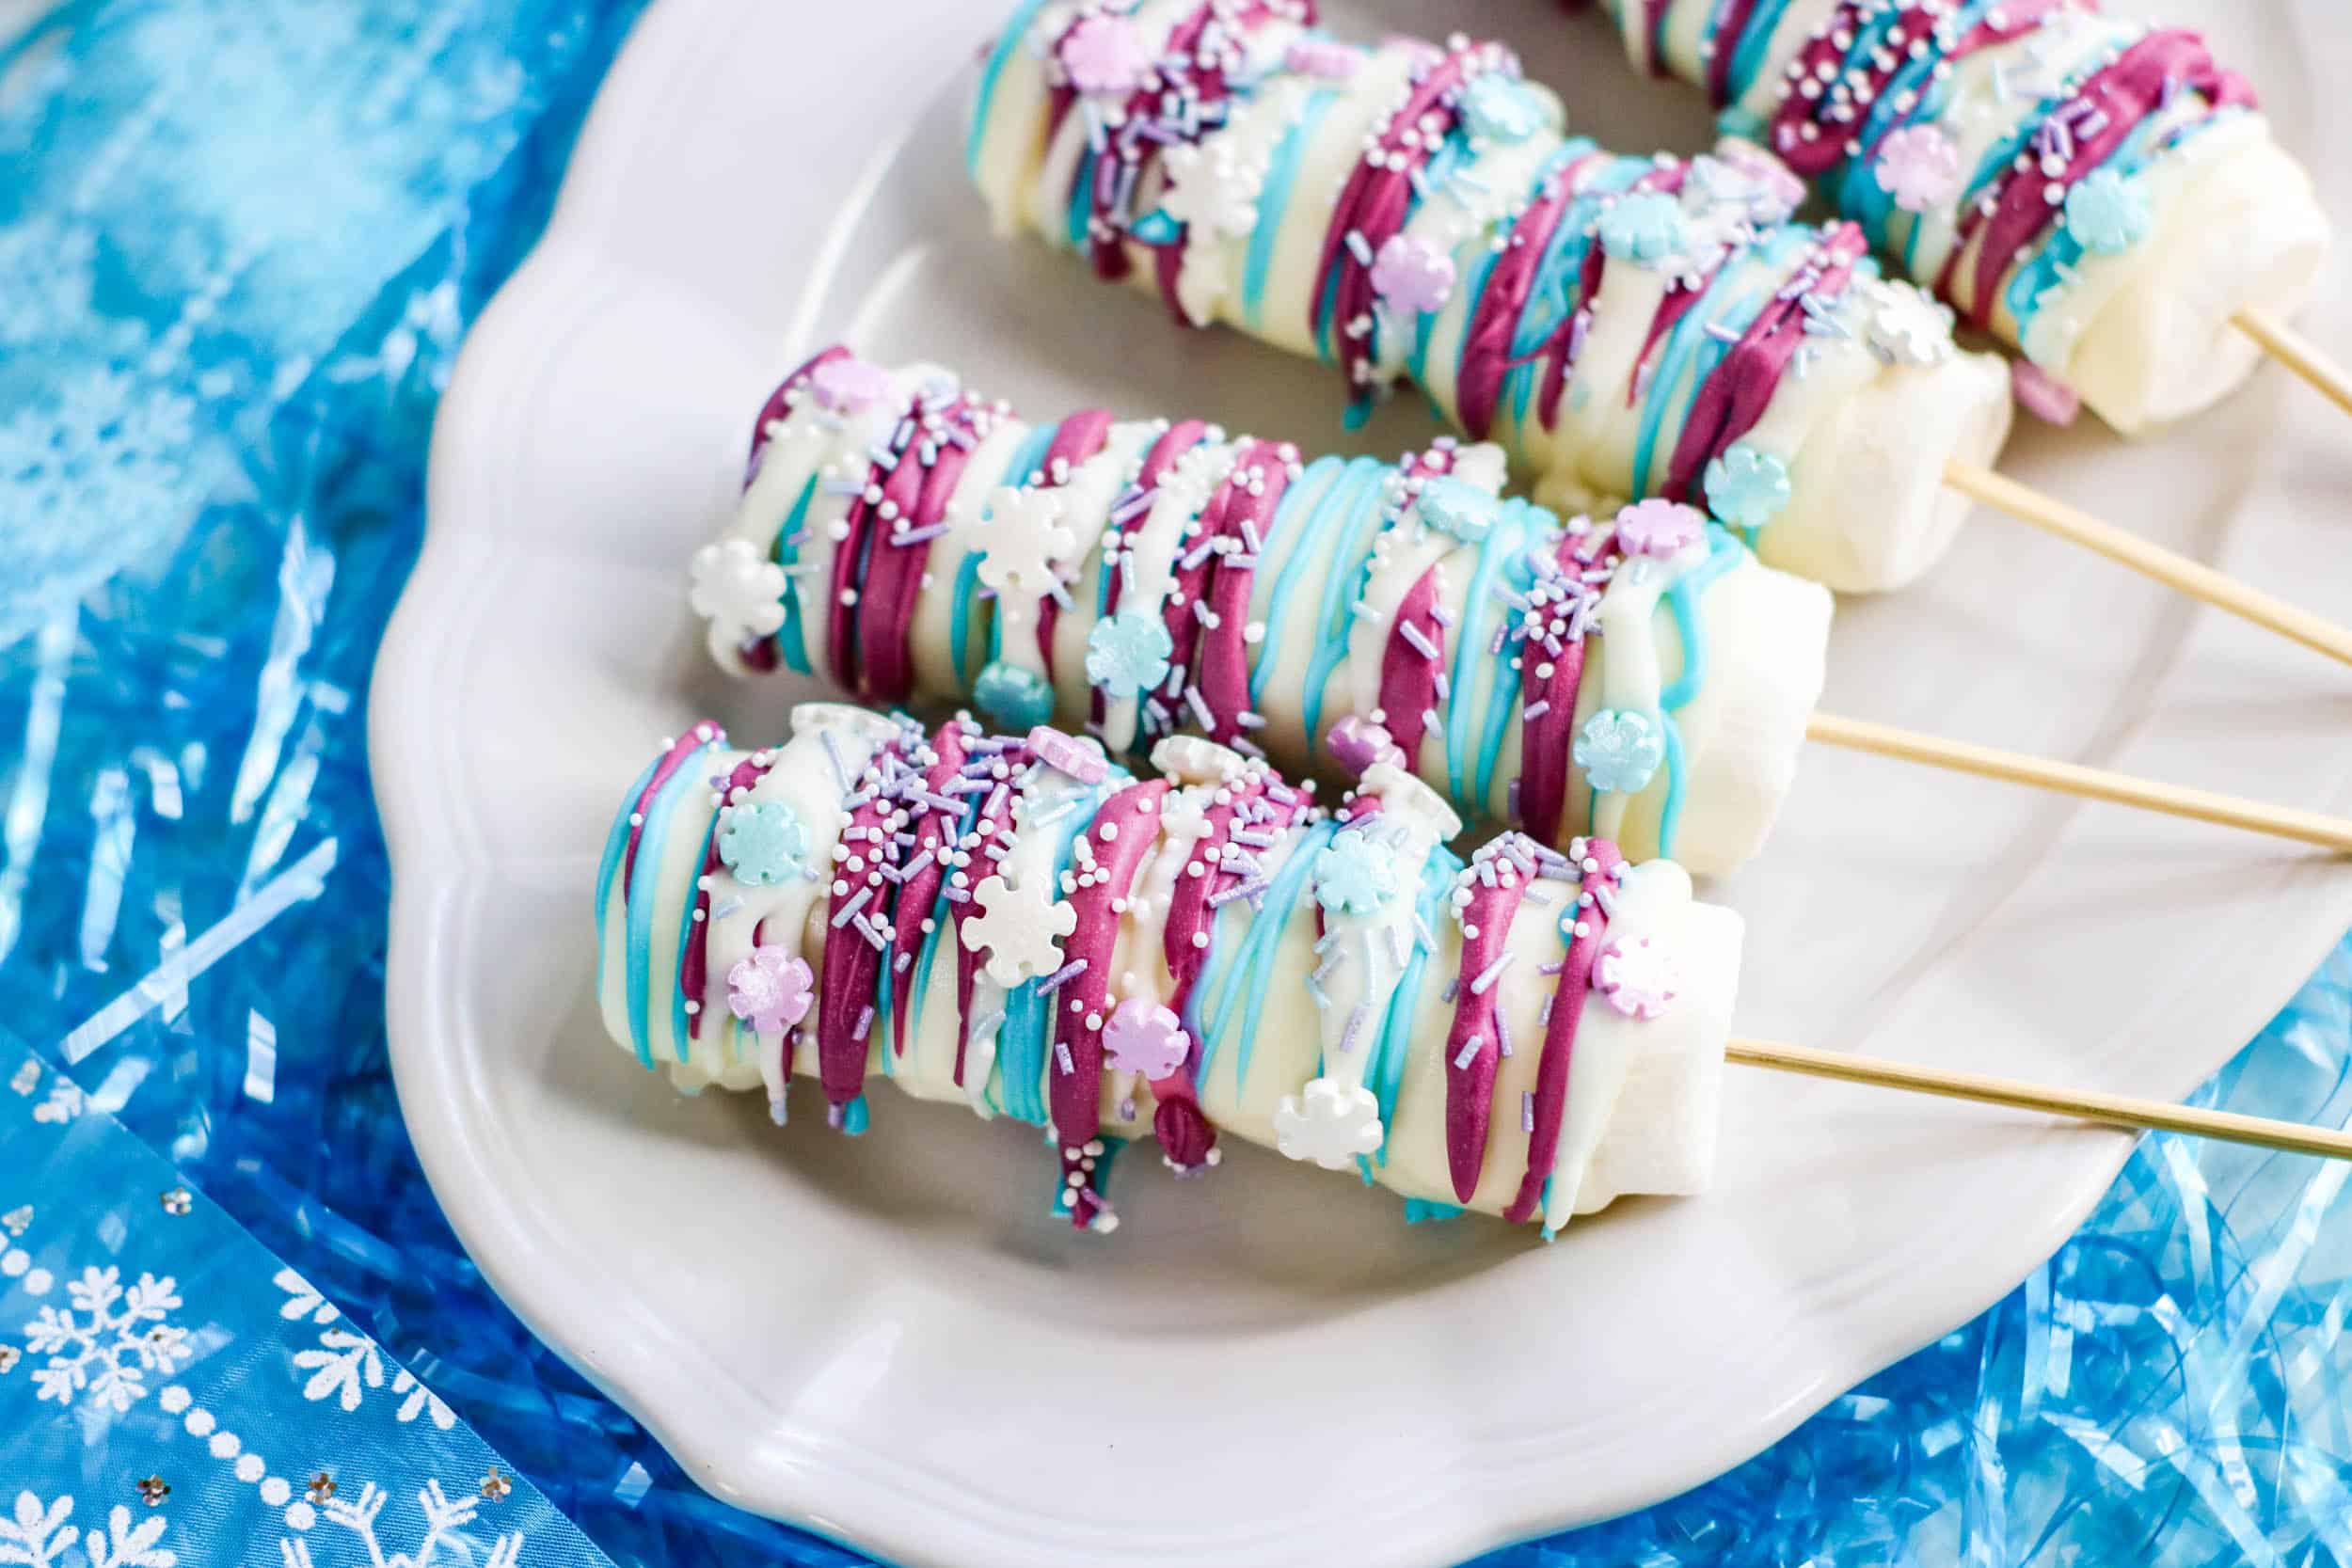 How to make Frozen 2 themed marshmallow pops